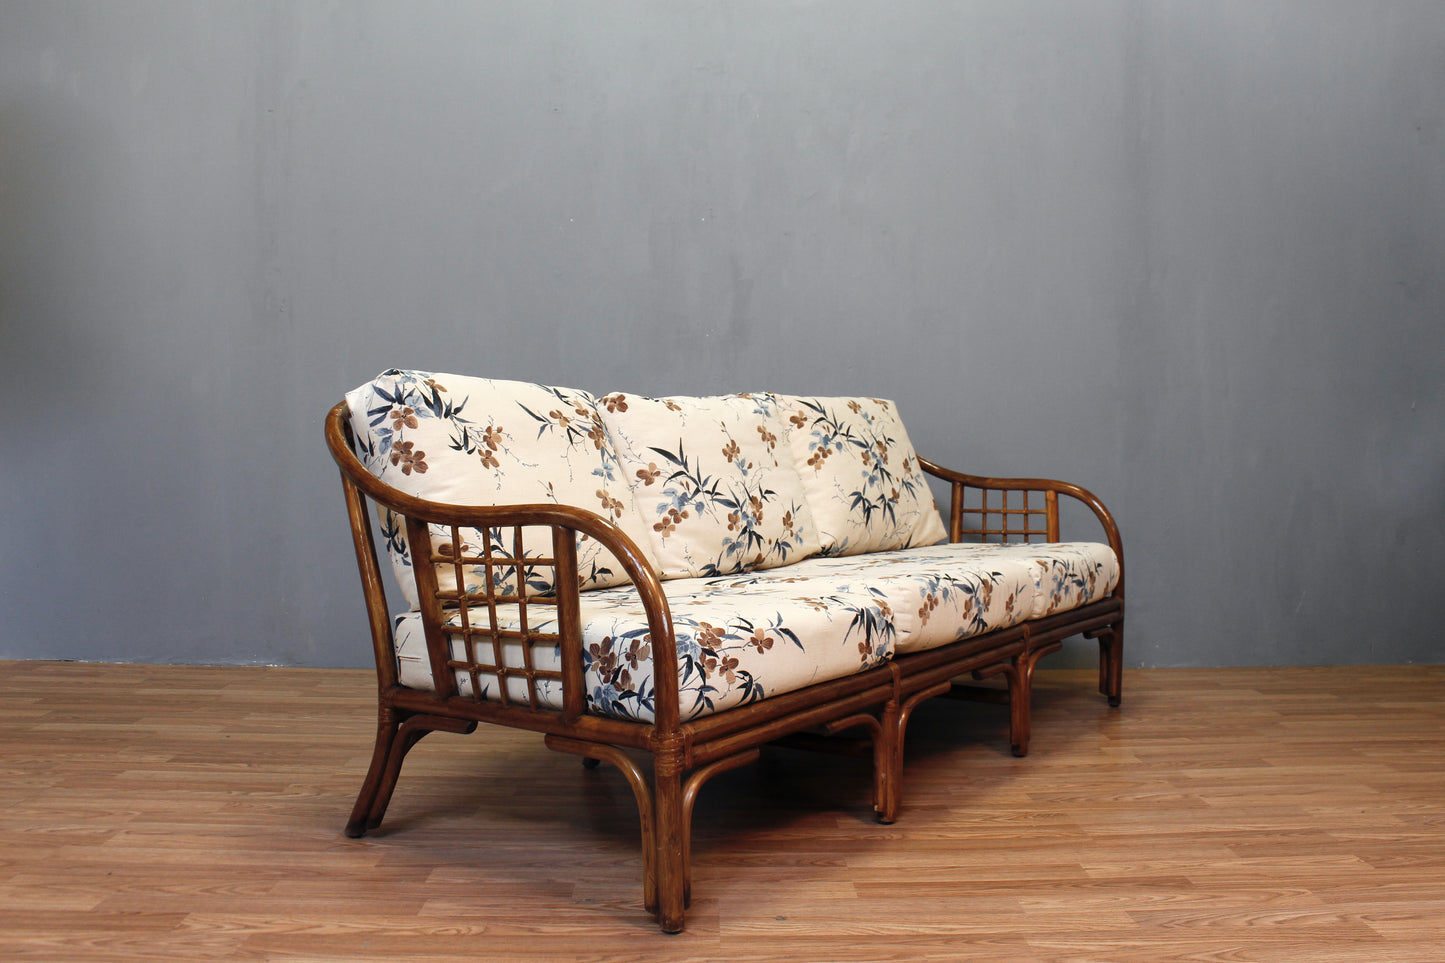 Rattan & White Floral Sofa - ONLINE ONLY